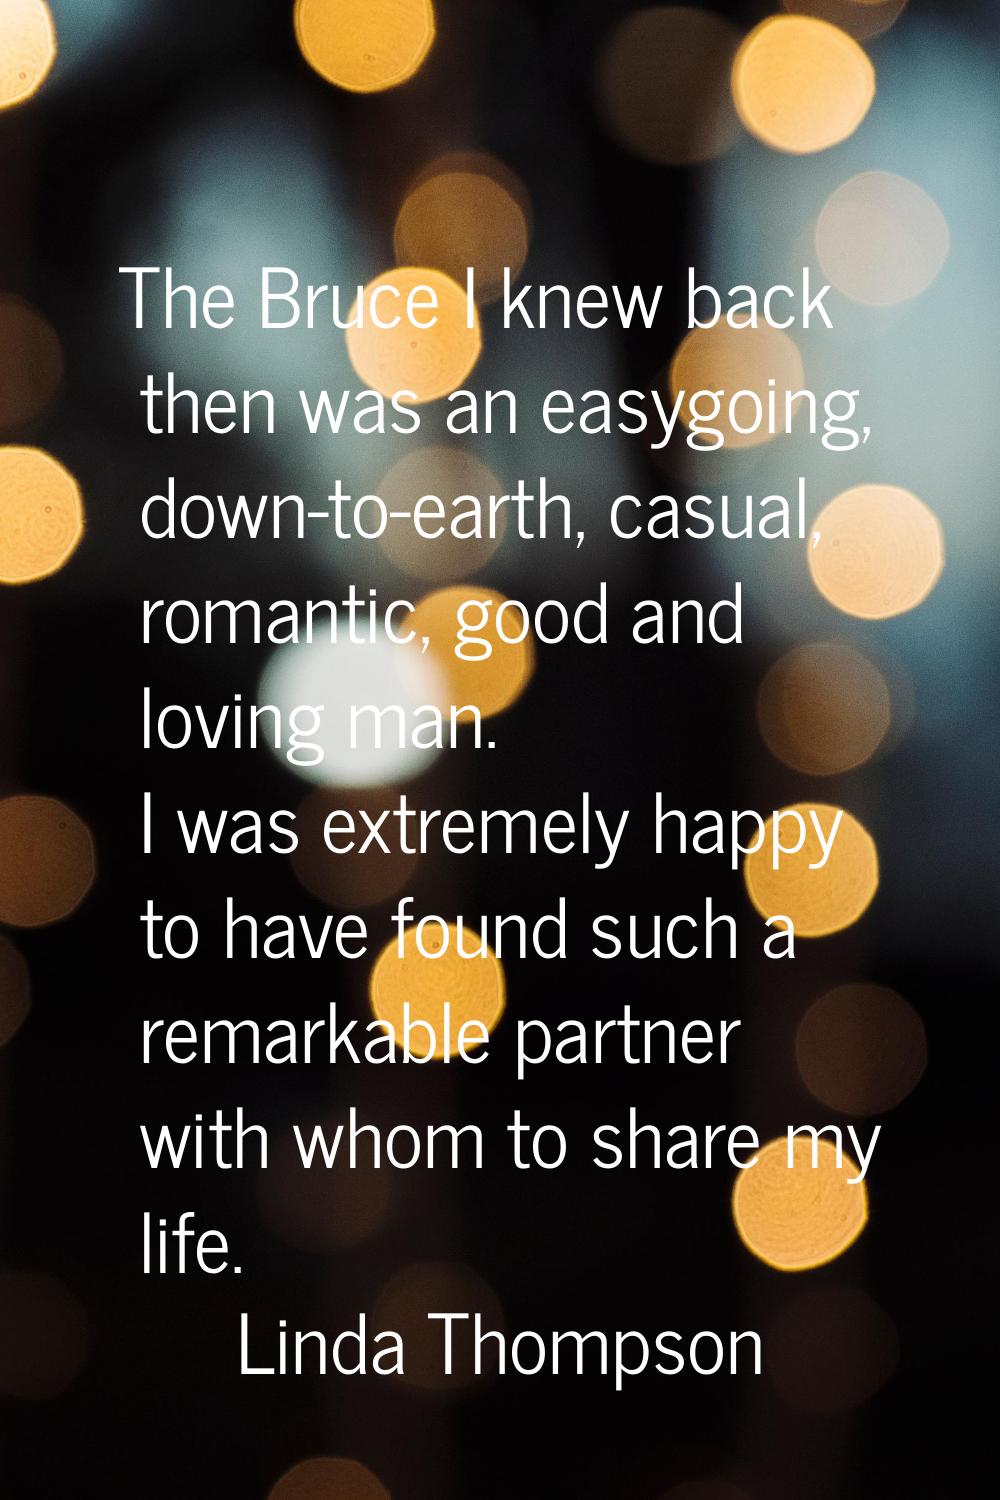 The Bruce I knew back then was an easygoing, down-to-earth, casual, romantic, good and loving man. 